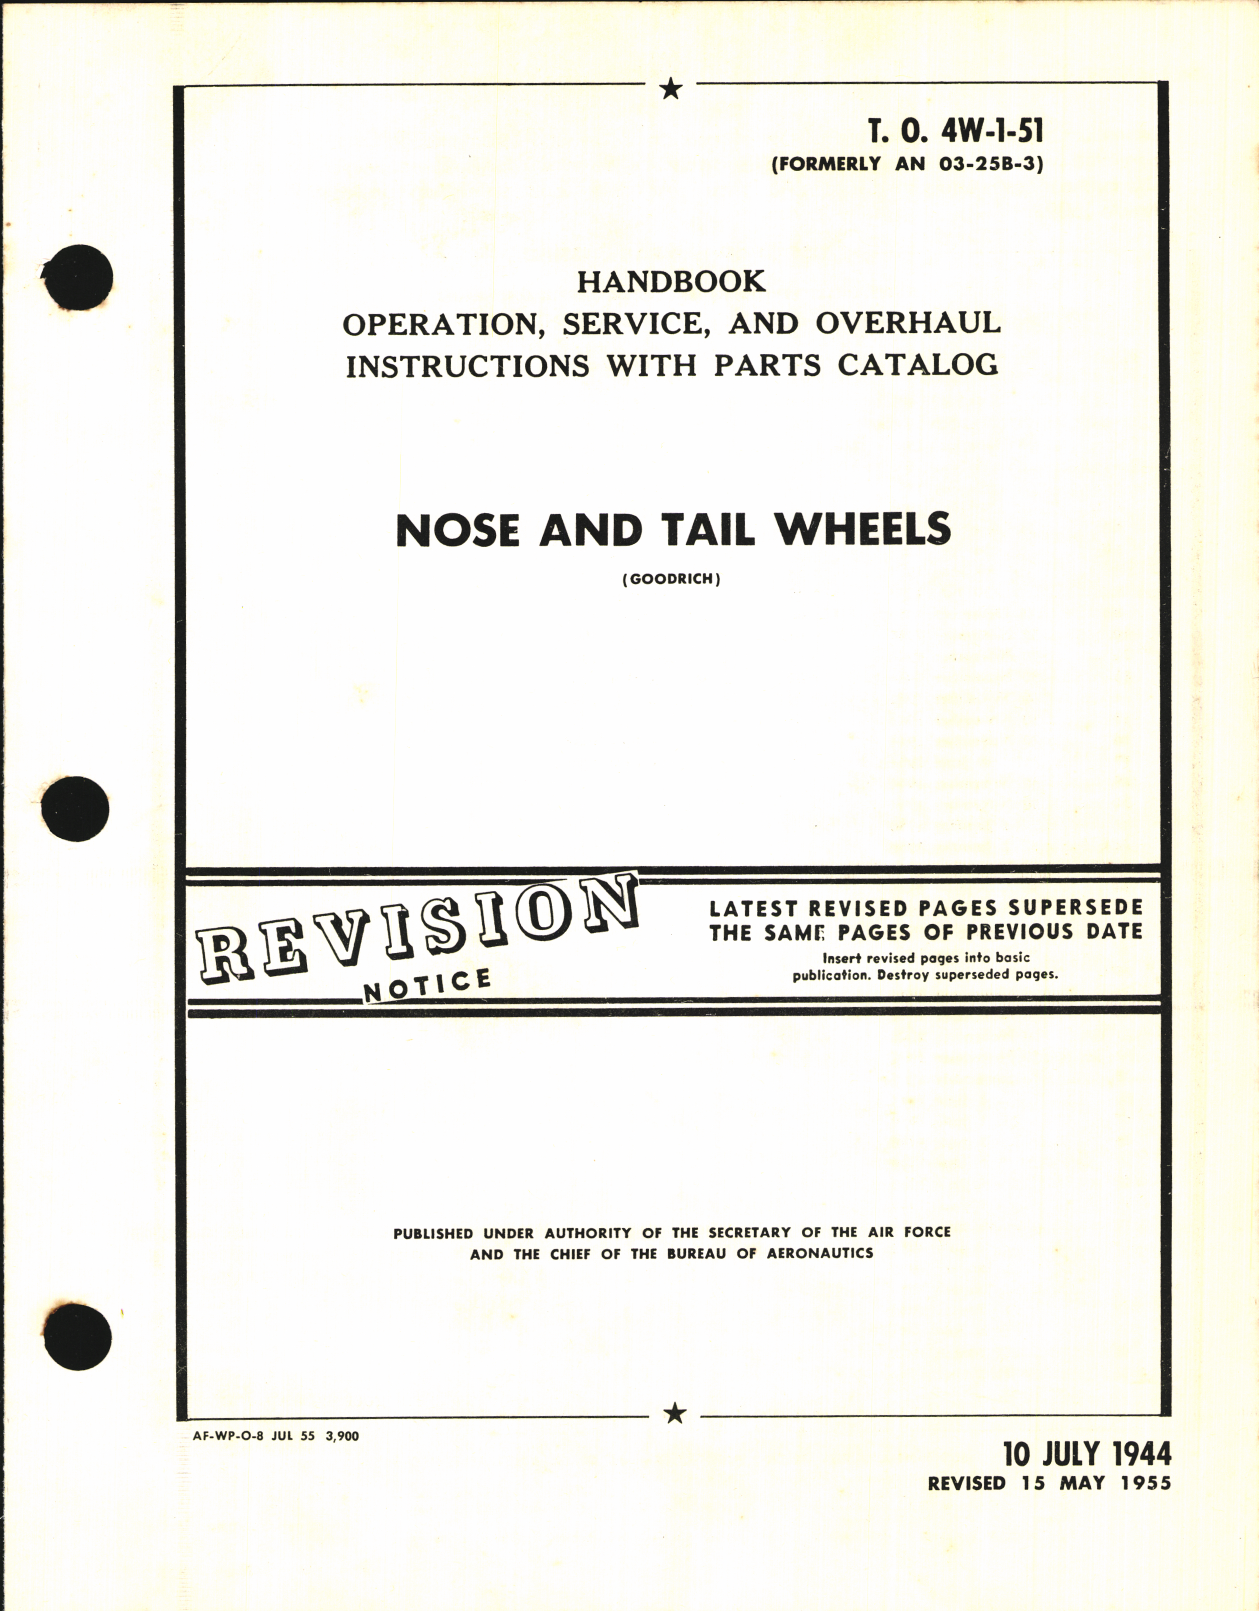 Sample page 1 from AirCorps Library document: Operation, Service, & Overhaul Inst w/ Parts Catalog for Nose and Tail Wheels